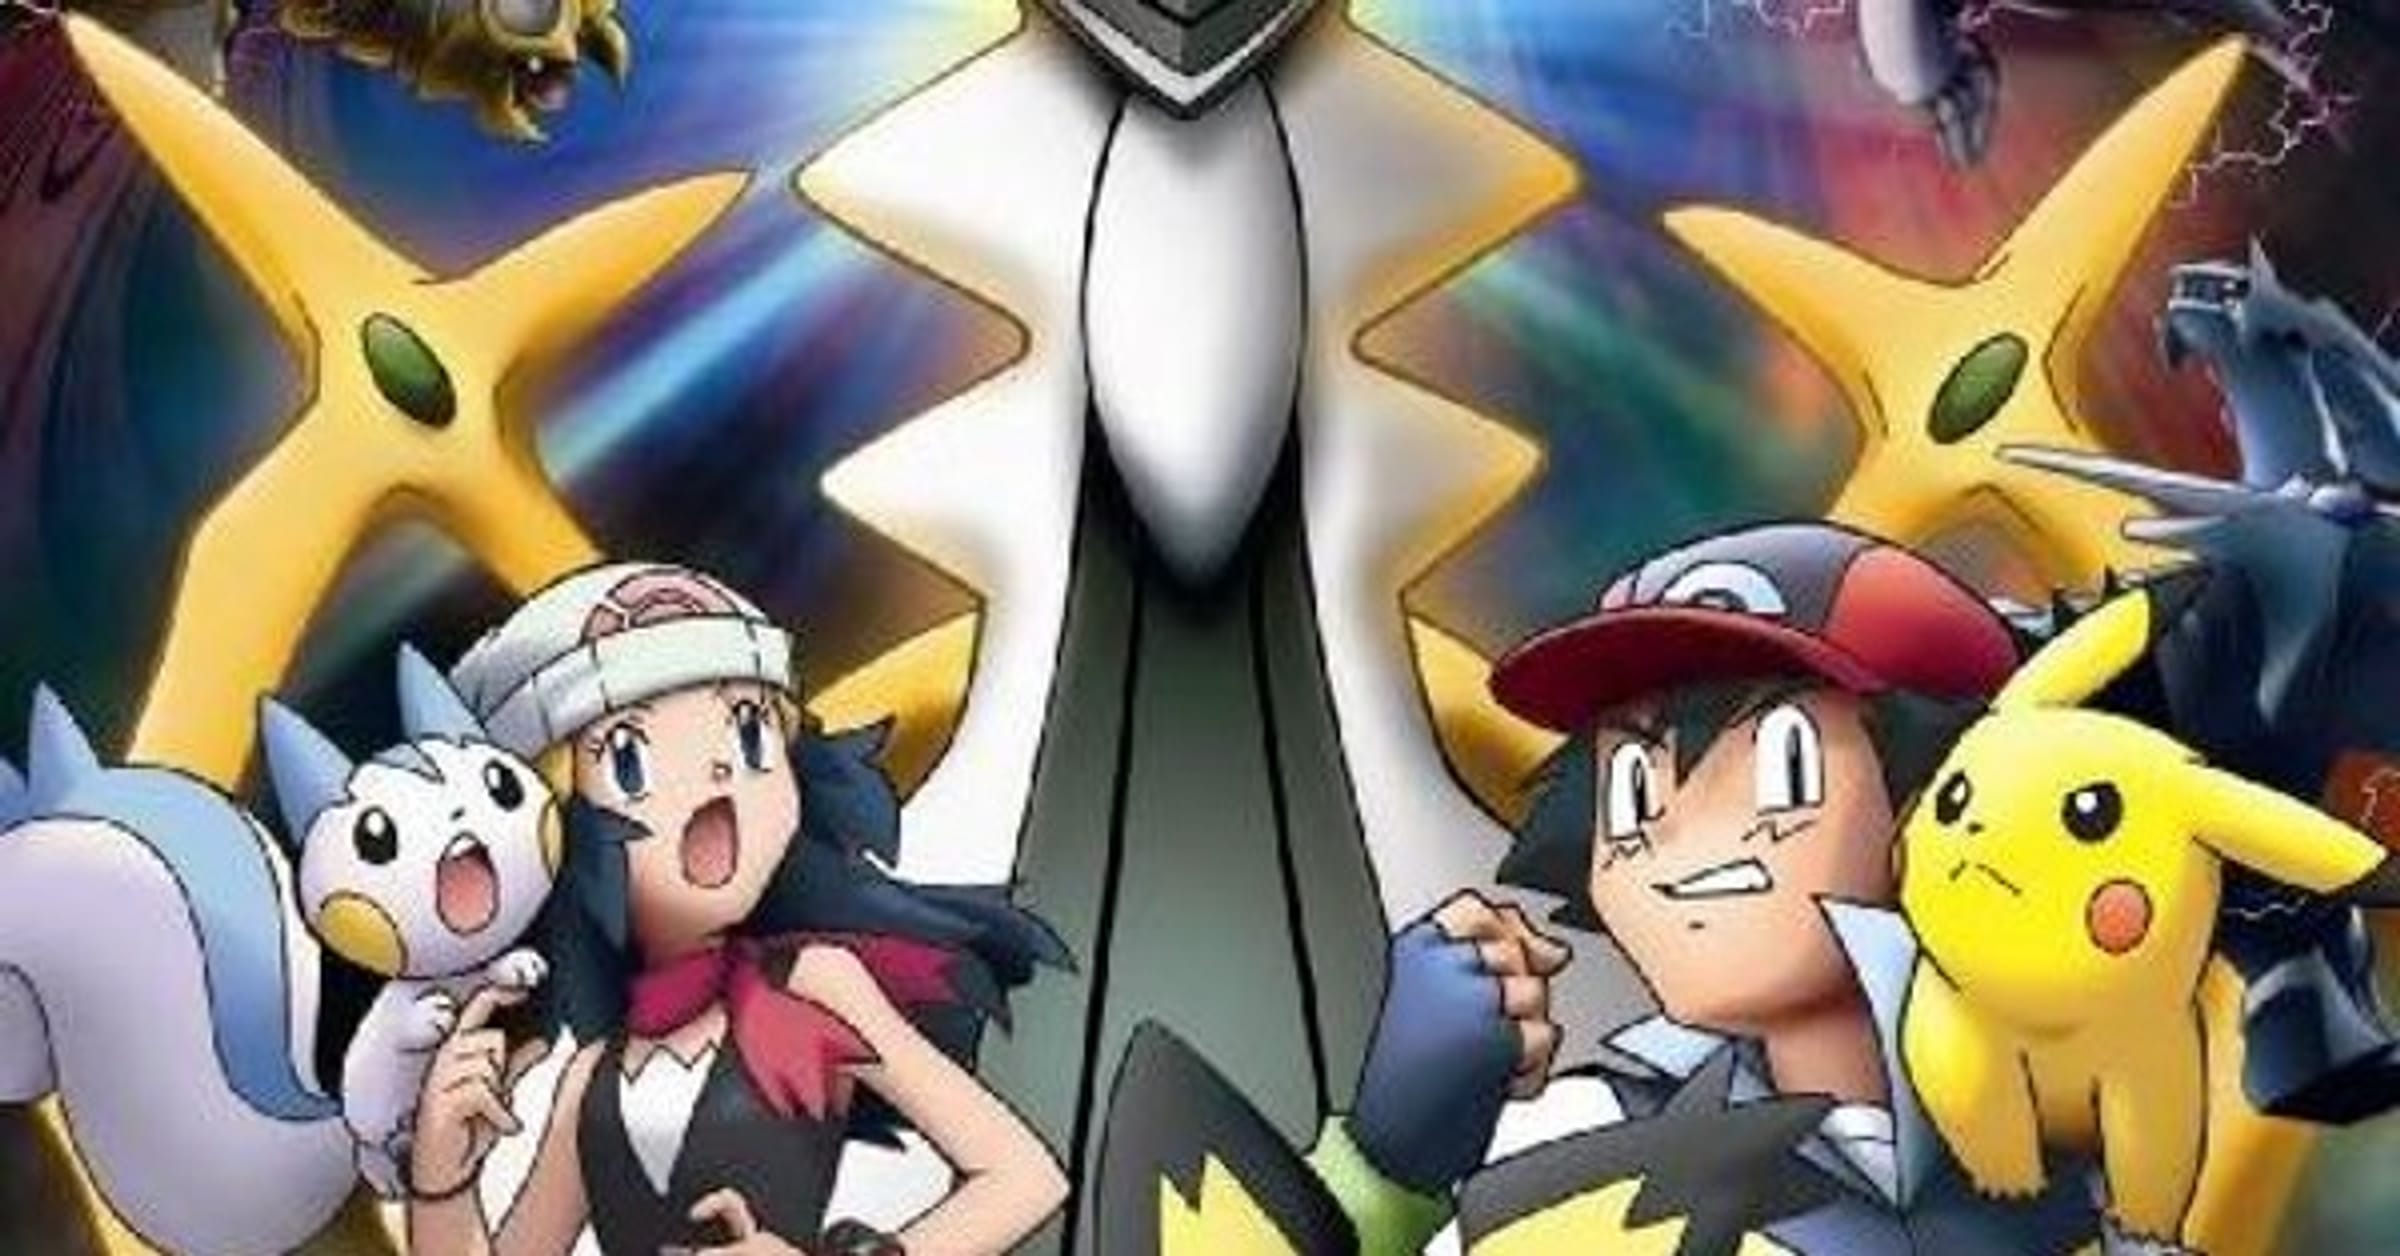 Pokemon: Arceus and the Jewel of Life by Sarah Natochenny, DVD